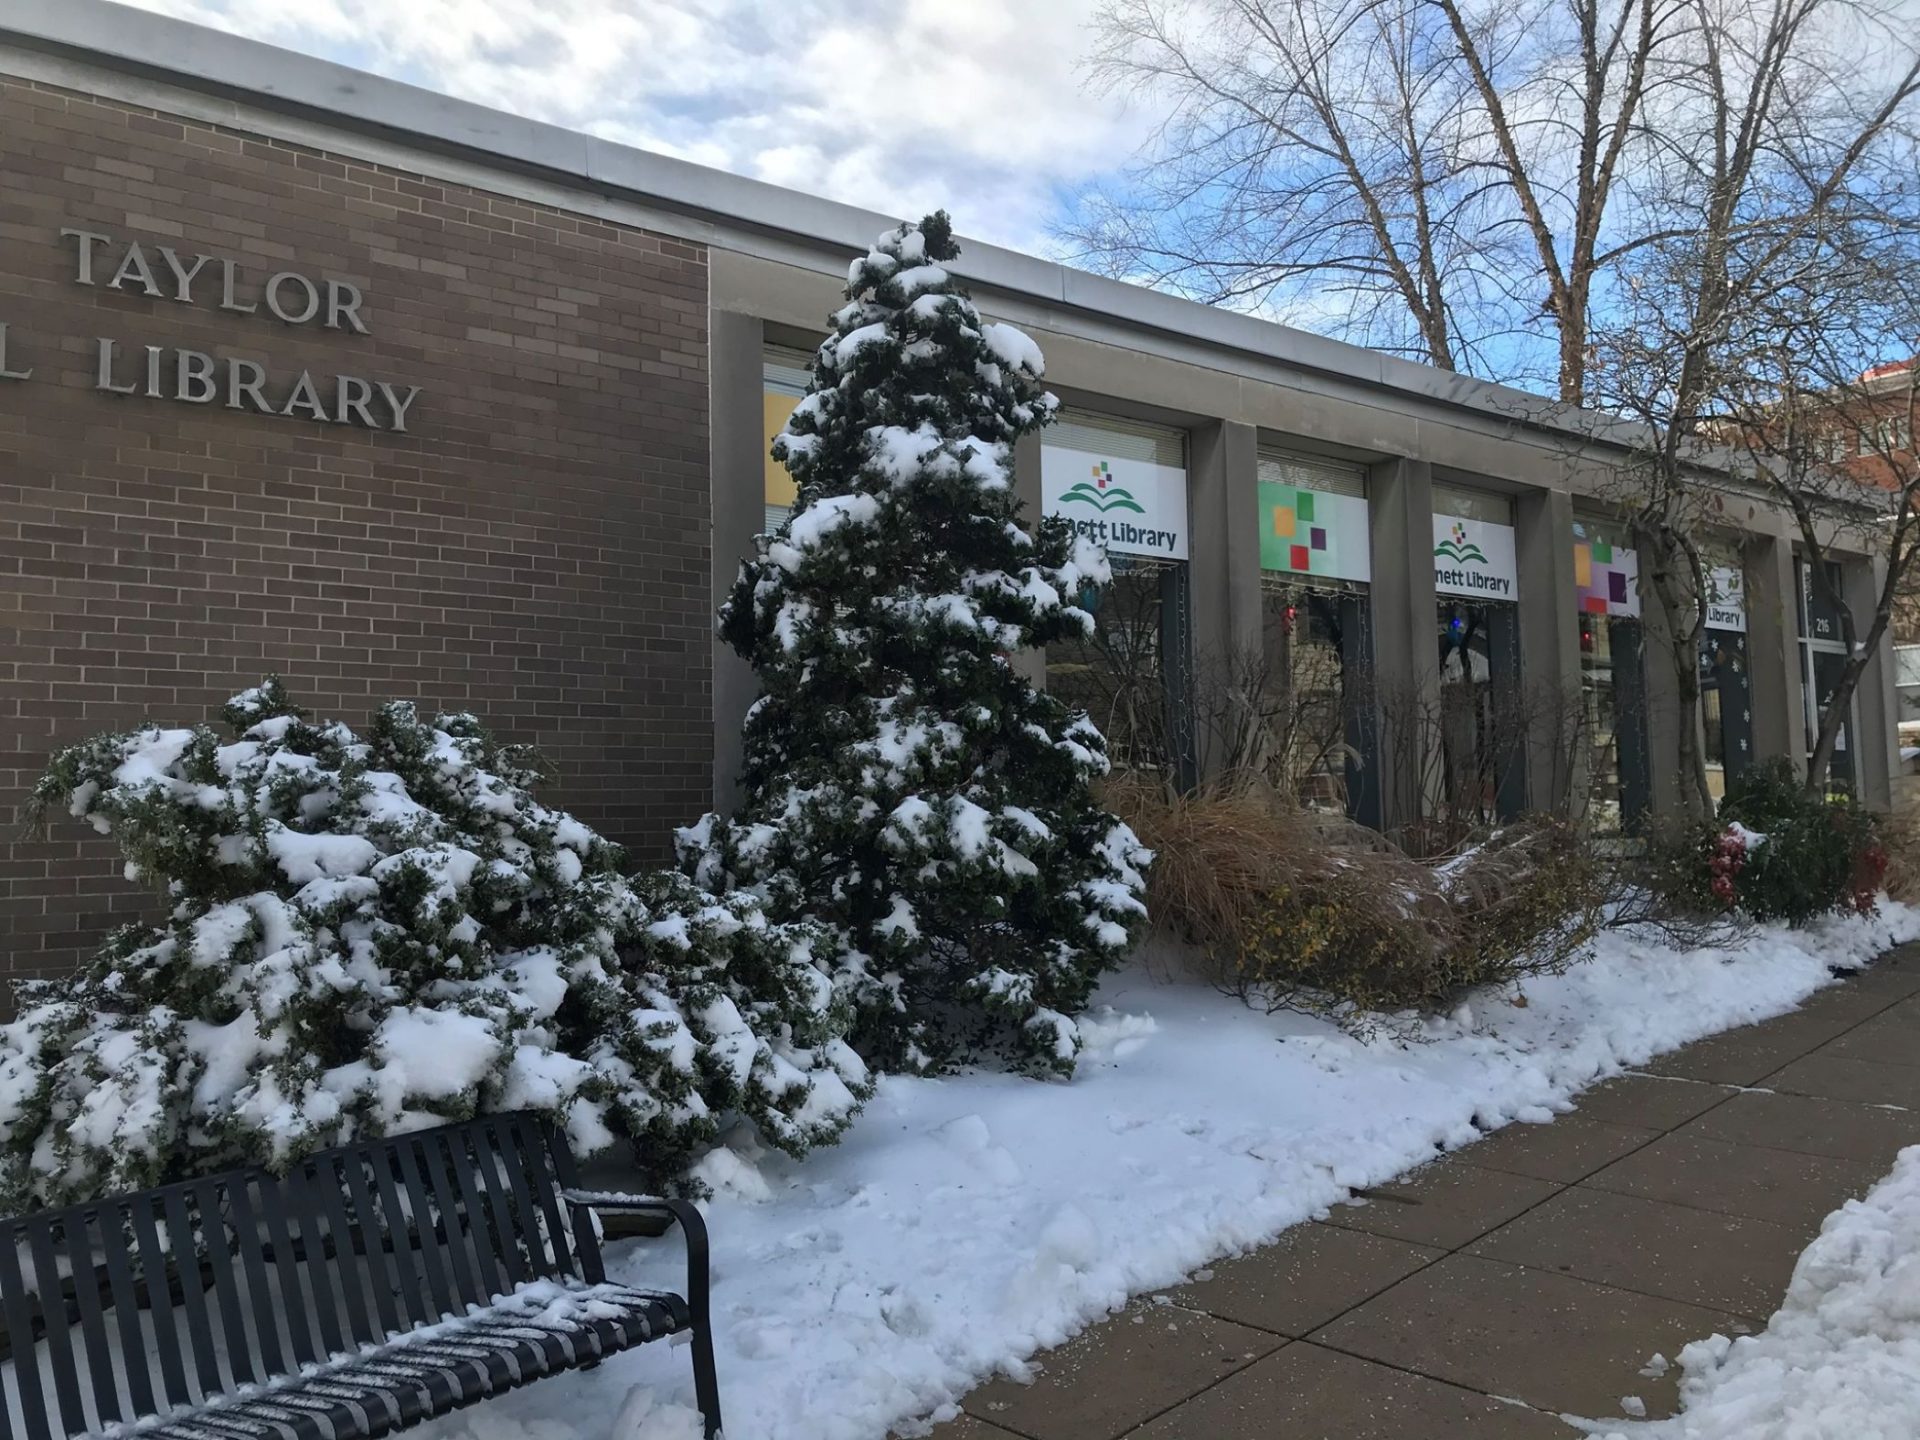 Kennett Library is pictured on a snowy day in December 2020.